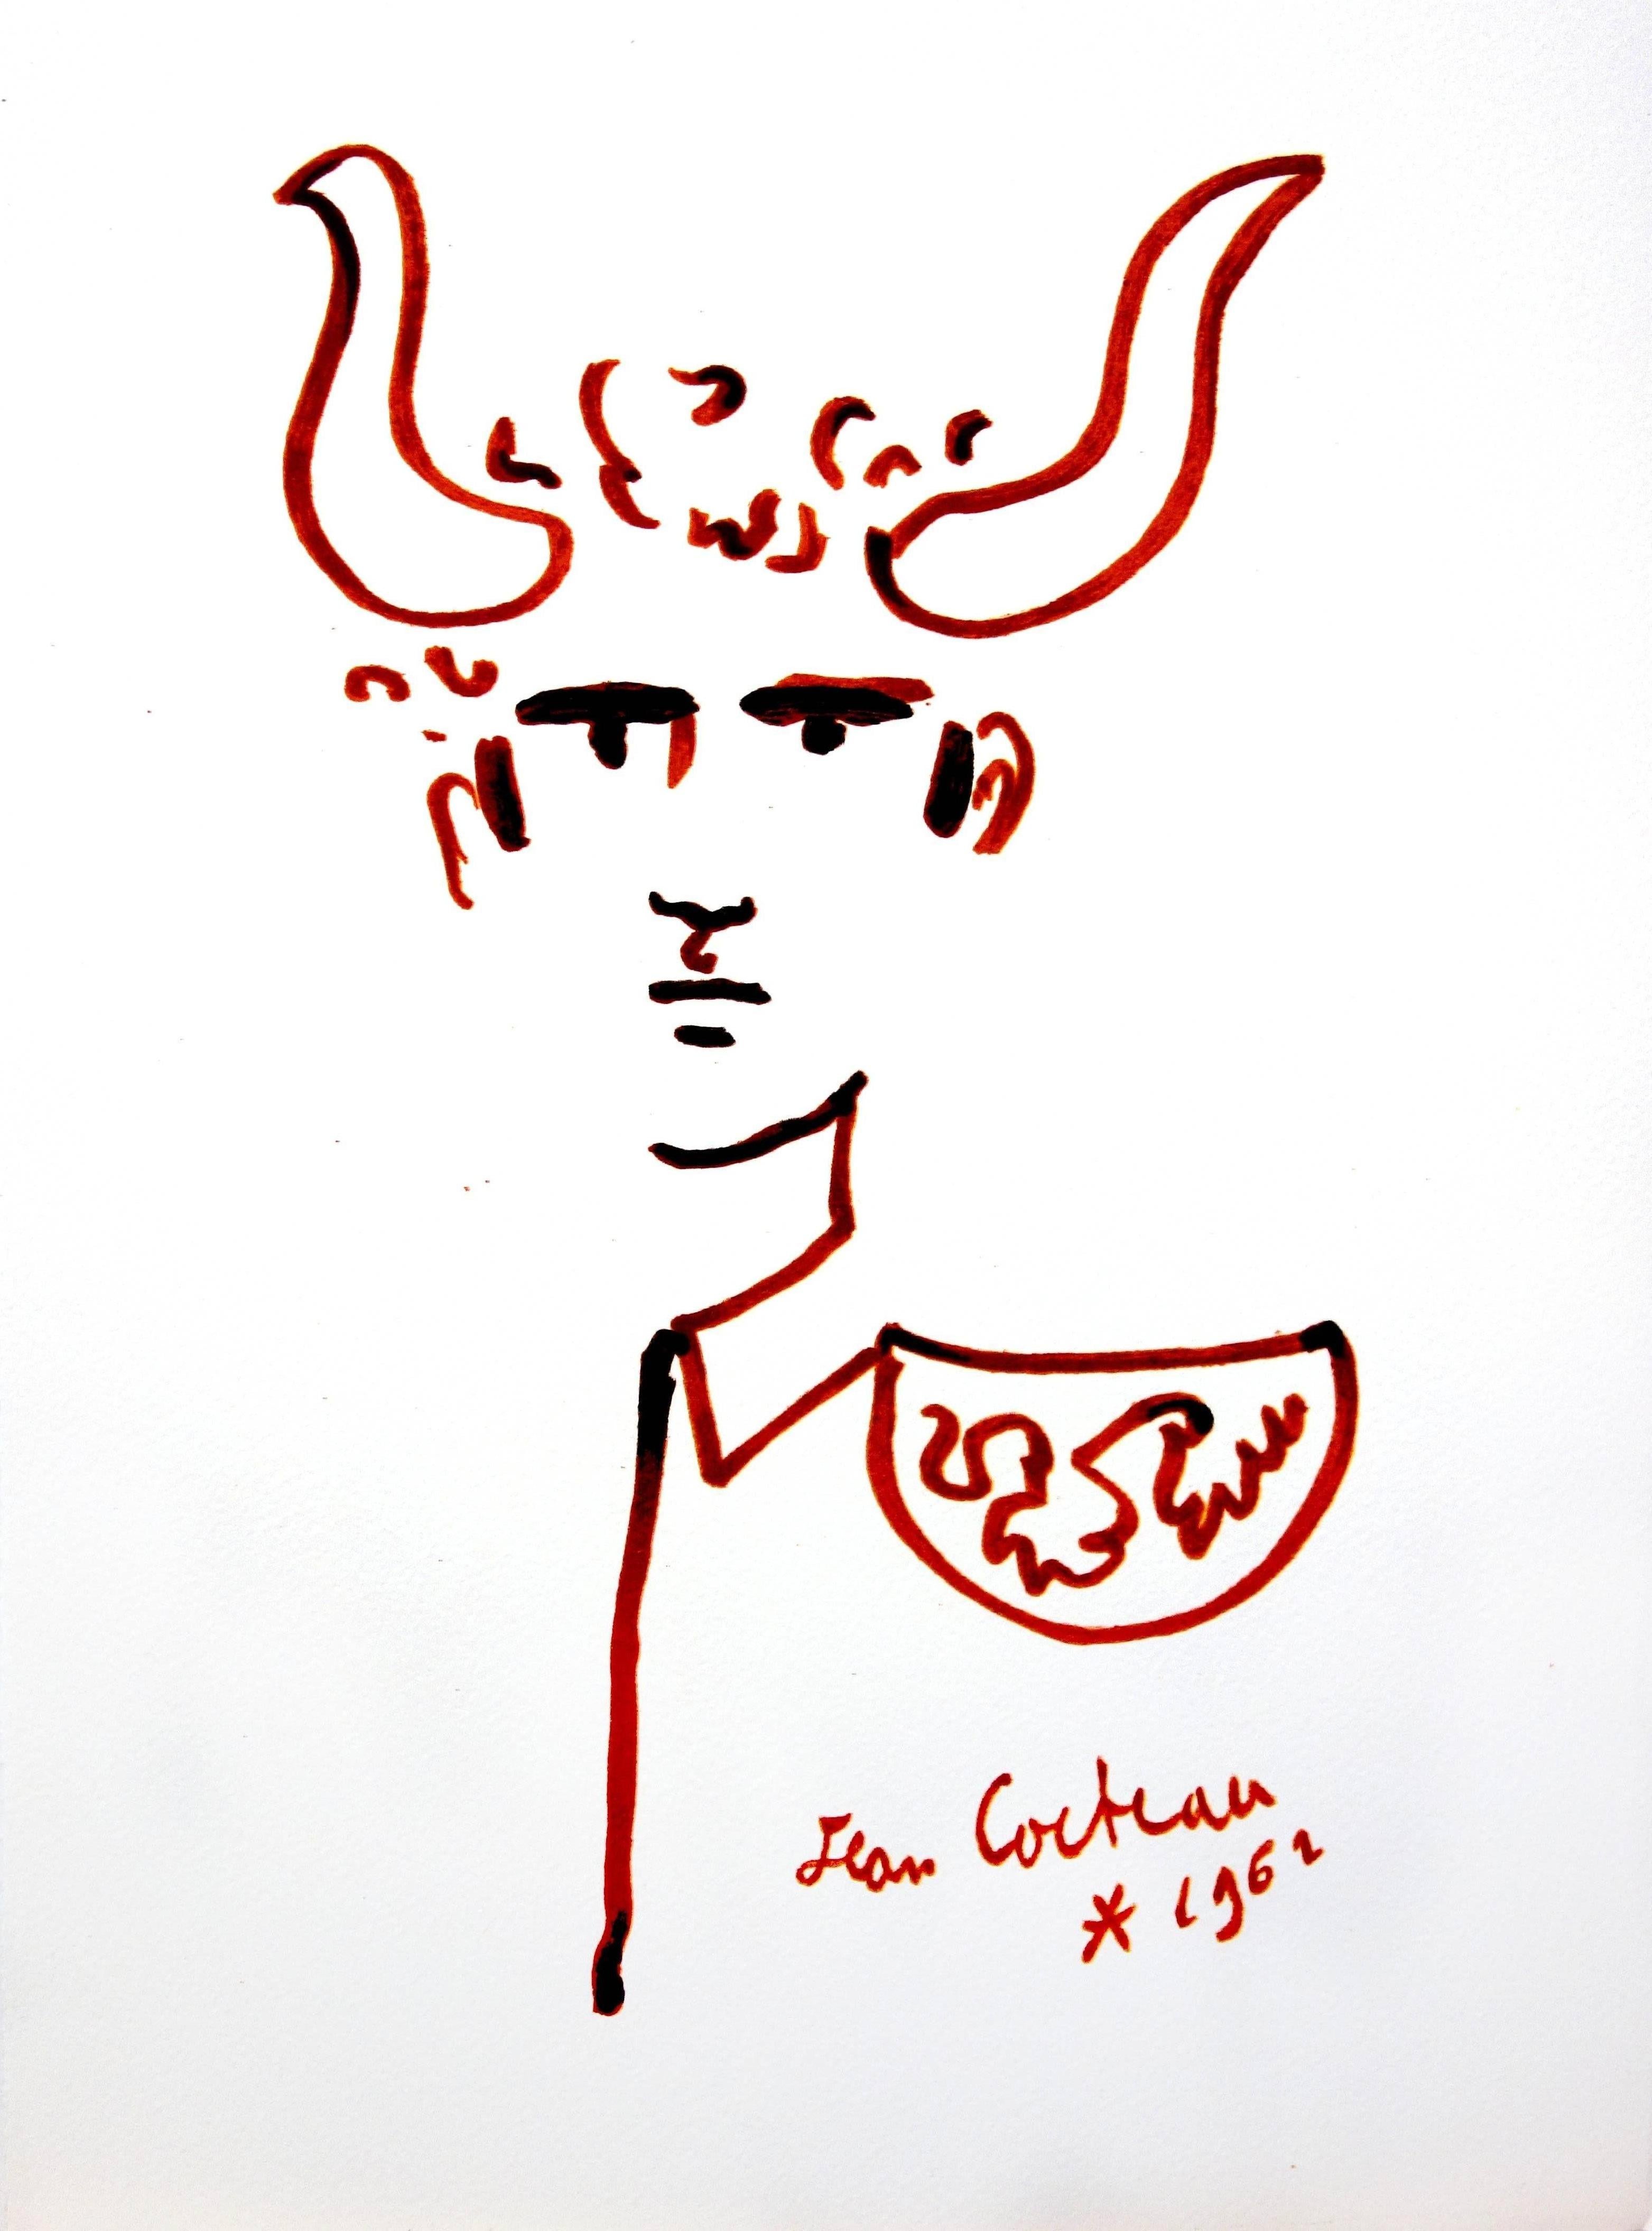 Original Lithograph by Jean Cocteau
Title: Taureaux
Signed in the plate
Dimensions: 40 x 30 cm
Edition: 200
Luxury print edition from the portfolio of Trinckvel
1965

Jean Cocteau

Writer, artist and film director Jean Cocteau was one of the most